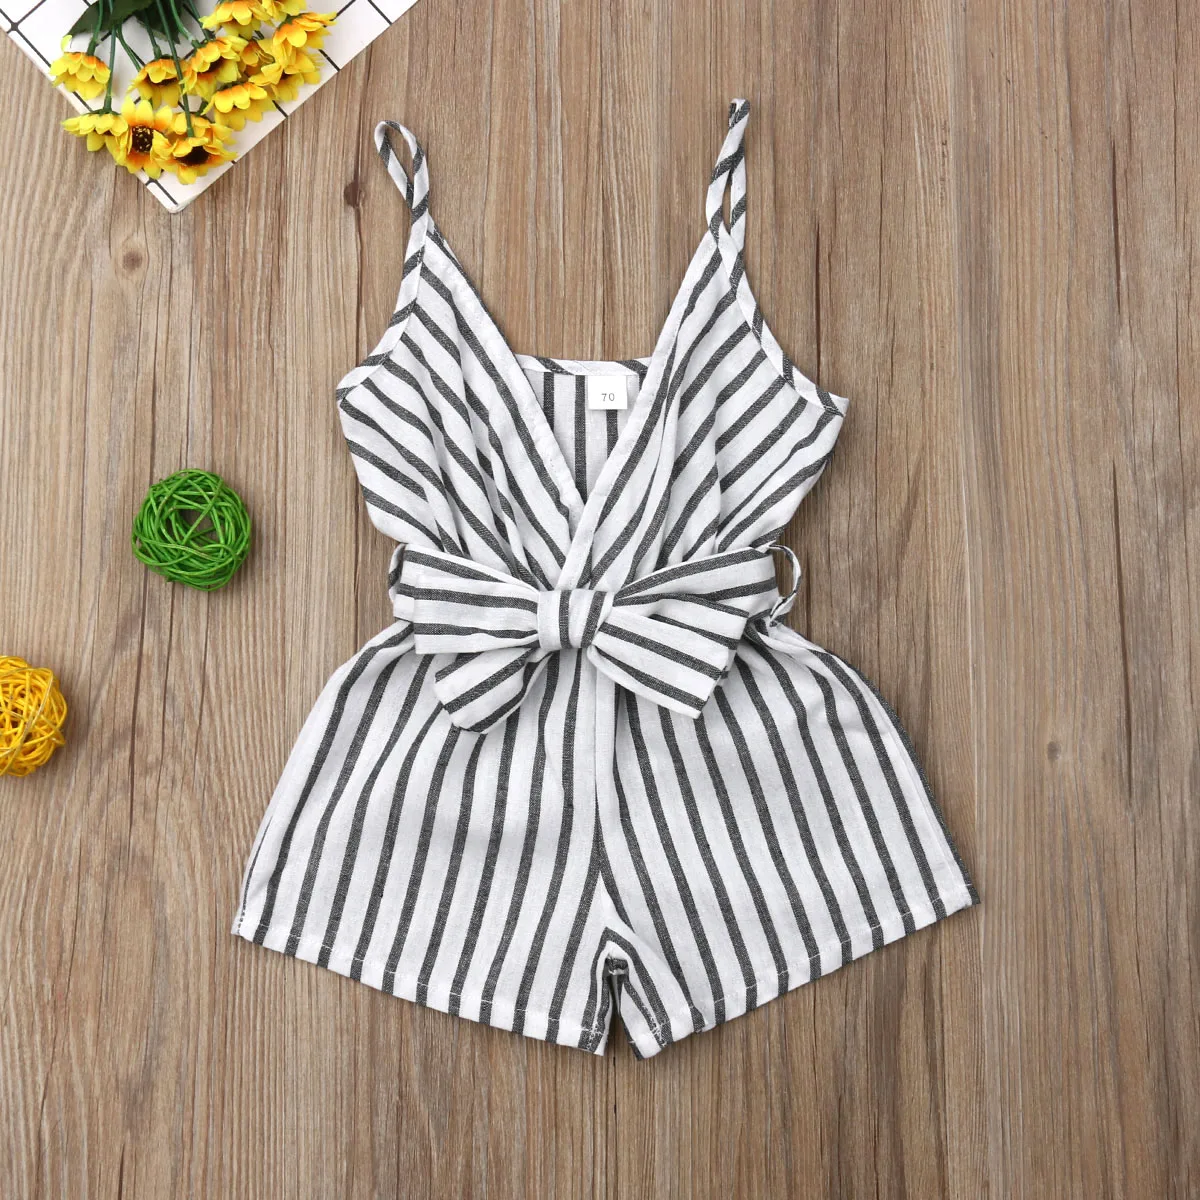 Baby Girls Cute Pants Bowknot Strap Stripe Romper Jumpsuit Top Outfits Clothes Set Toddler Girl One Piece Clothes